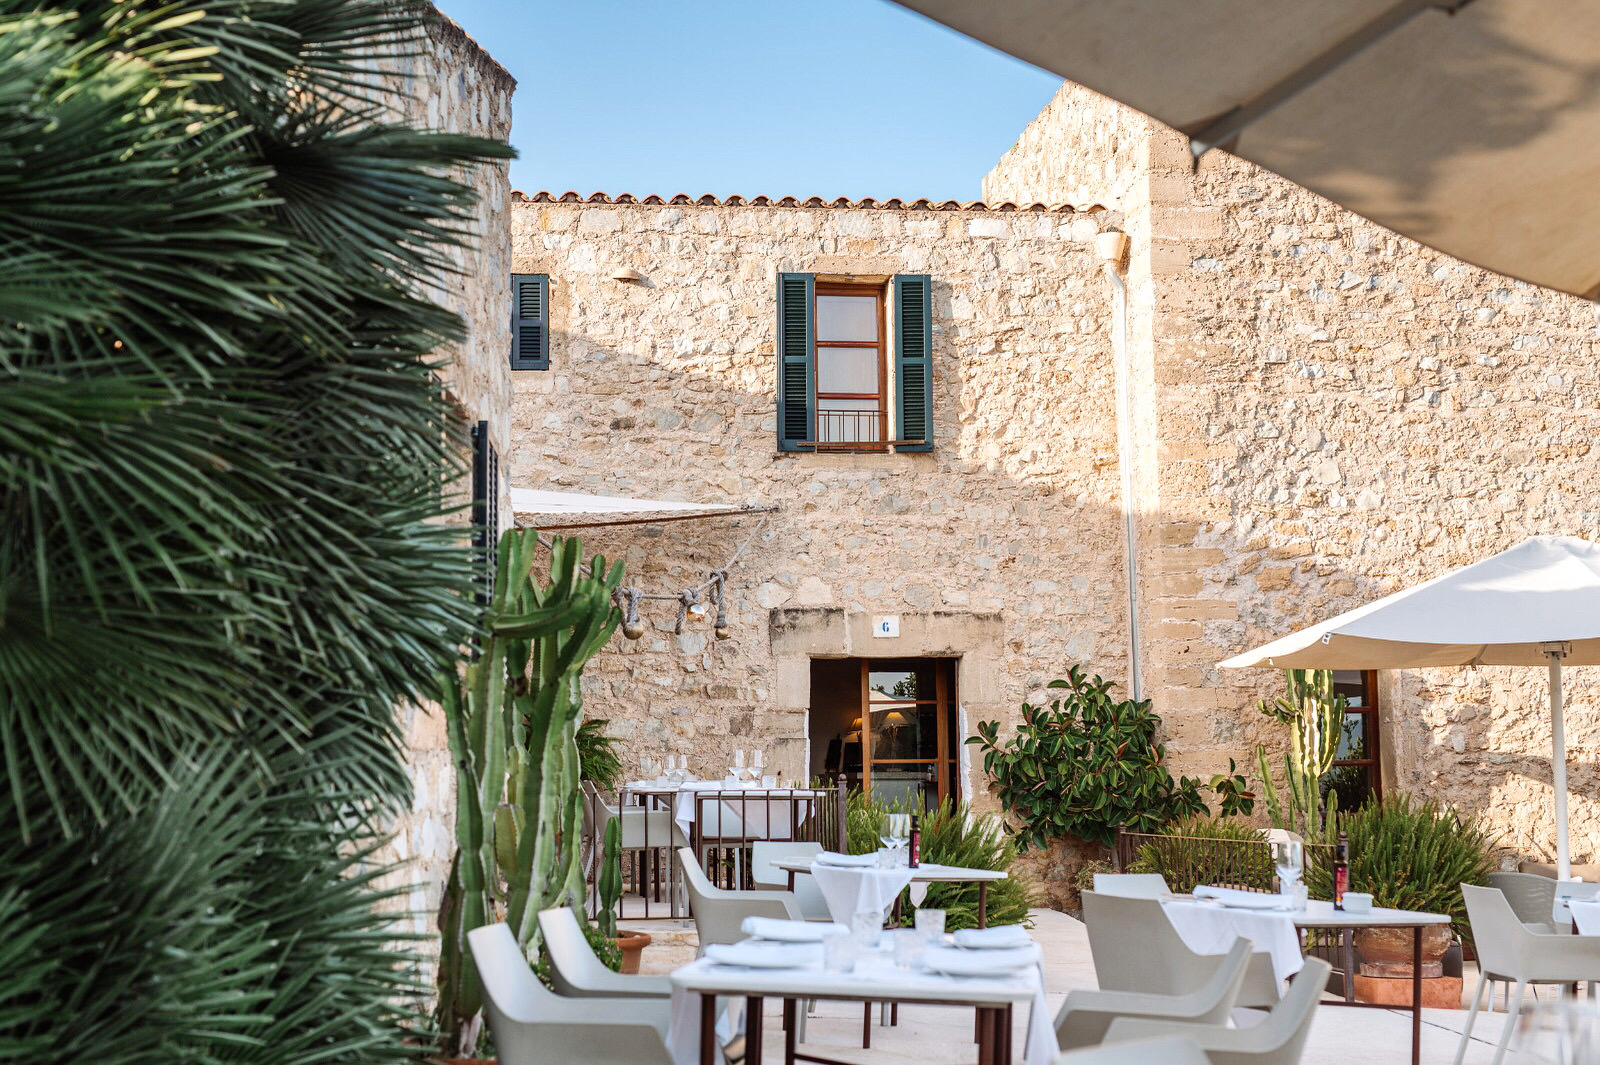 One of my top choices for a budget but beautiful hotel to stay in Mallorca - Cases de son Barbassa // Photo Credit Cases de son Barbassa